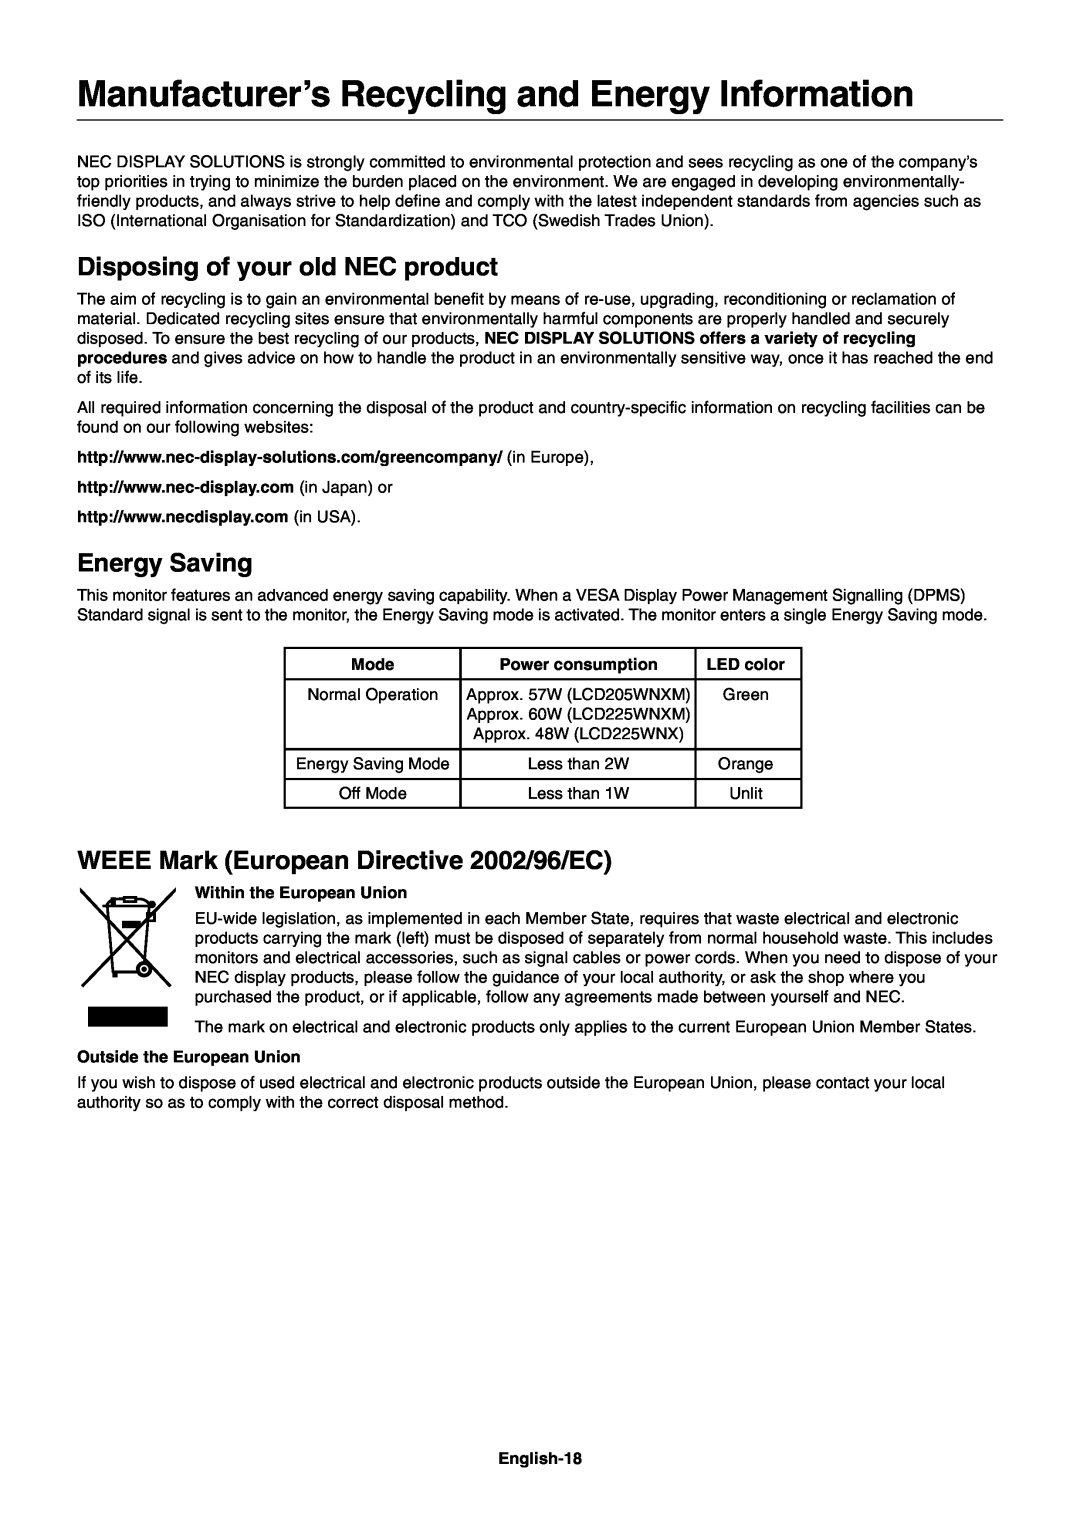 NEC LCD225WNX user manual ManufacturerÕs Recycling and Energy Information, Disposing of your old NEC product, Energy Saving 